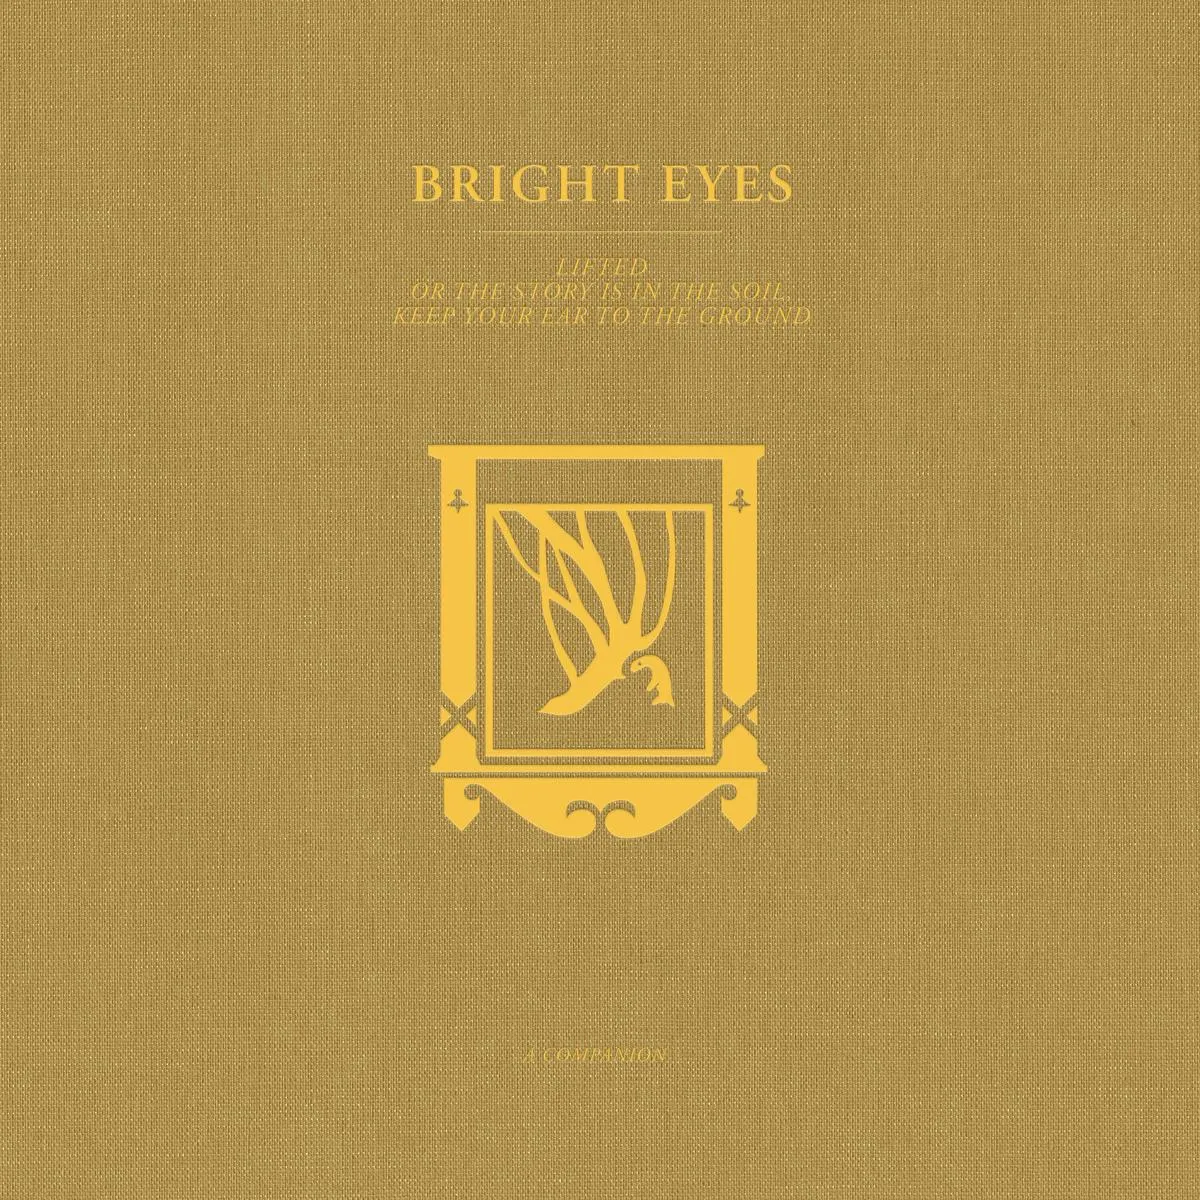 <strong>Bright Eyes - LIFTED or The Story Is in the Soil, Keep Your Ear to the Ground: A Companion</strong> (Vinyl LP - gold)